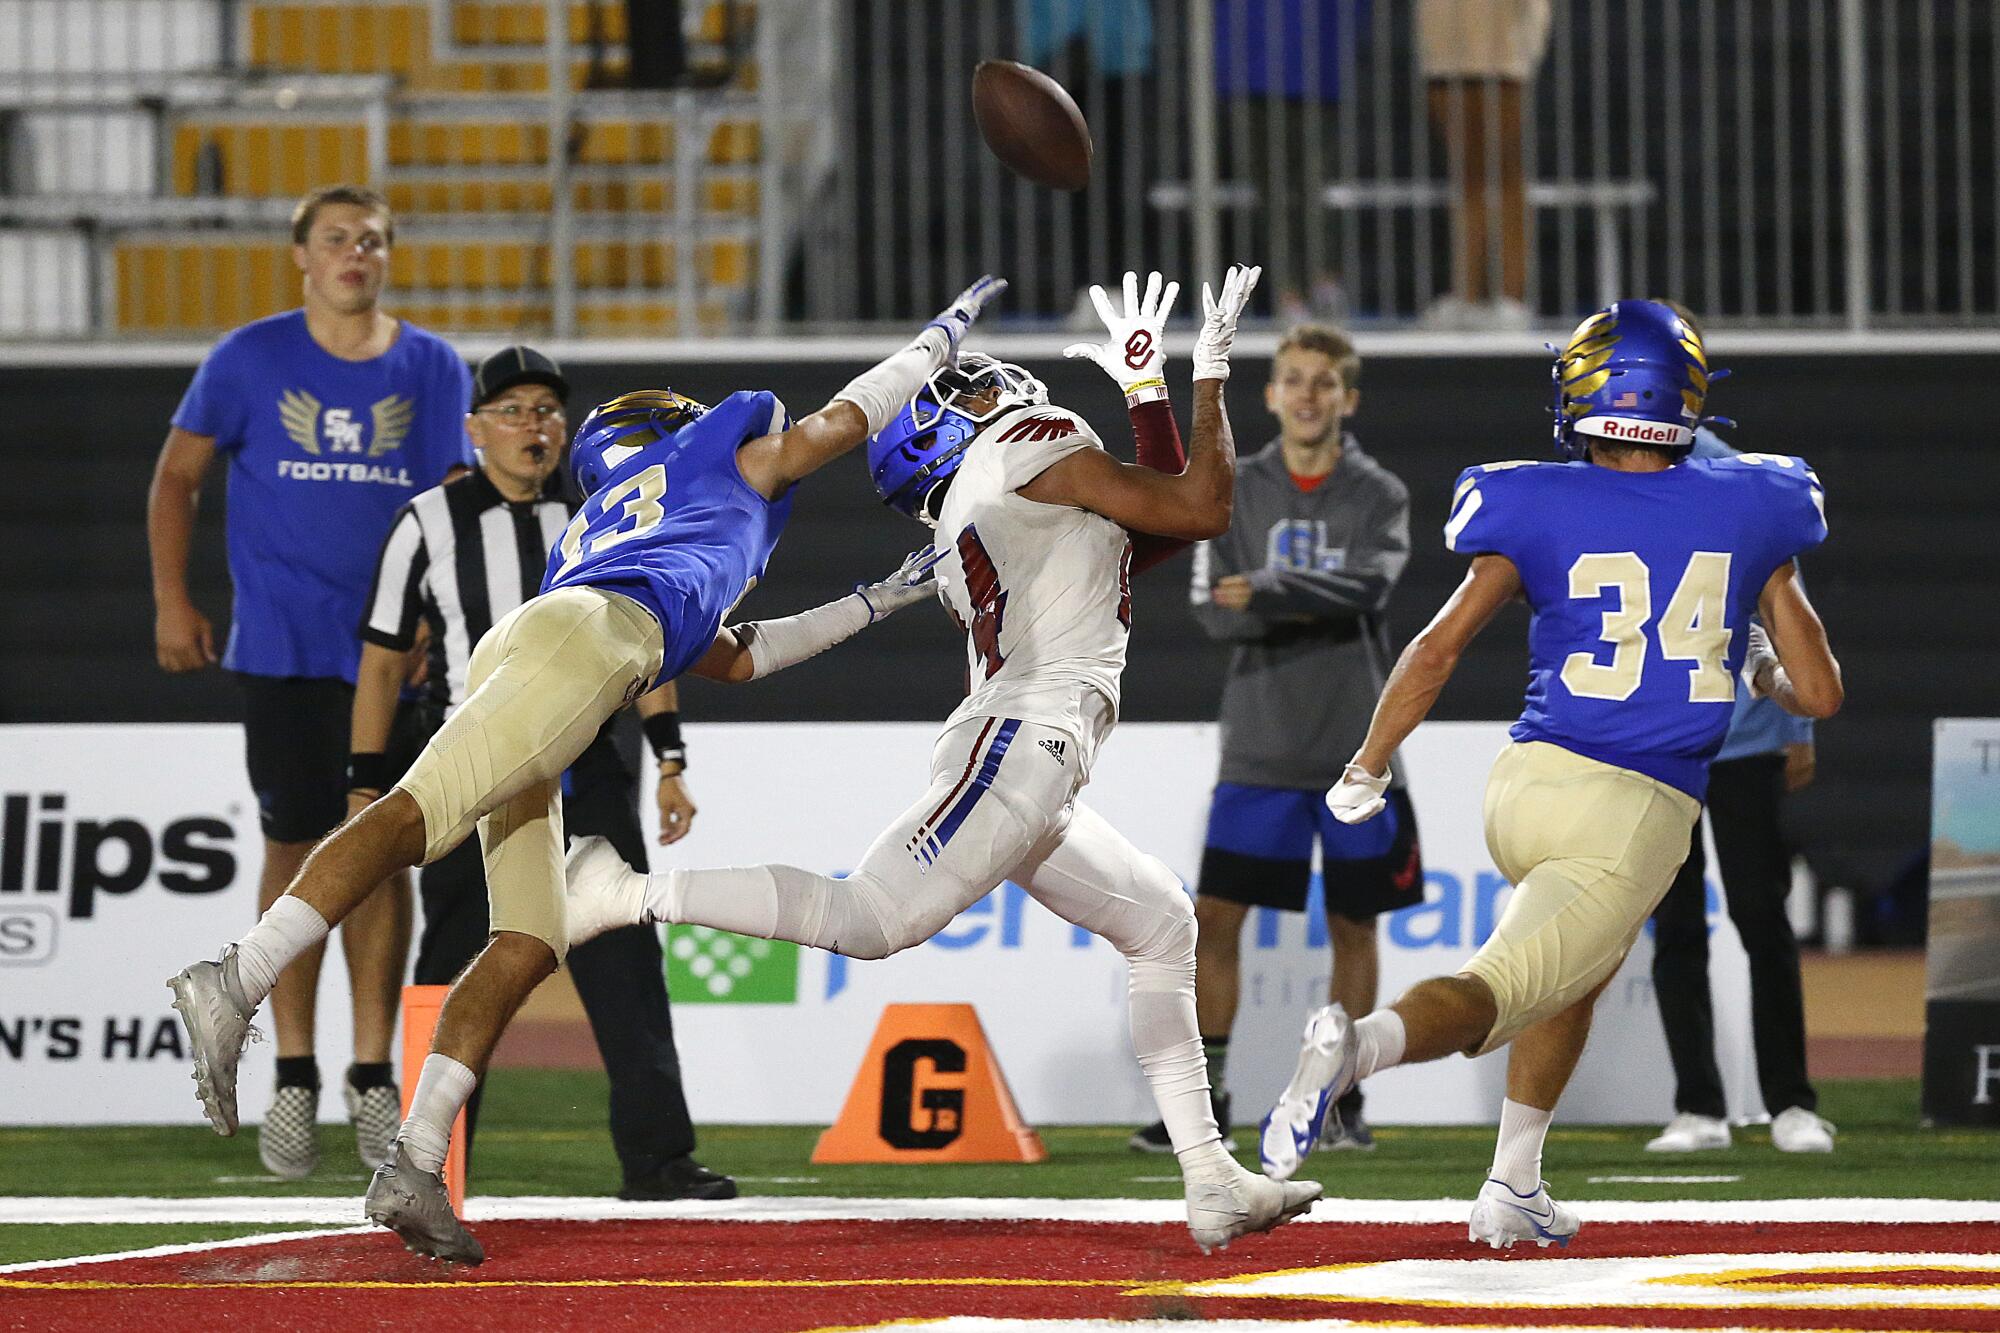 Los Alamitos's Makai Lemon attempts to haul in a pass while under pressure from Santa Margarita's Donovan Comestro.